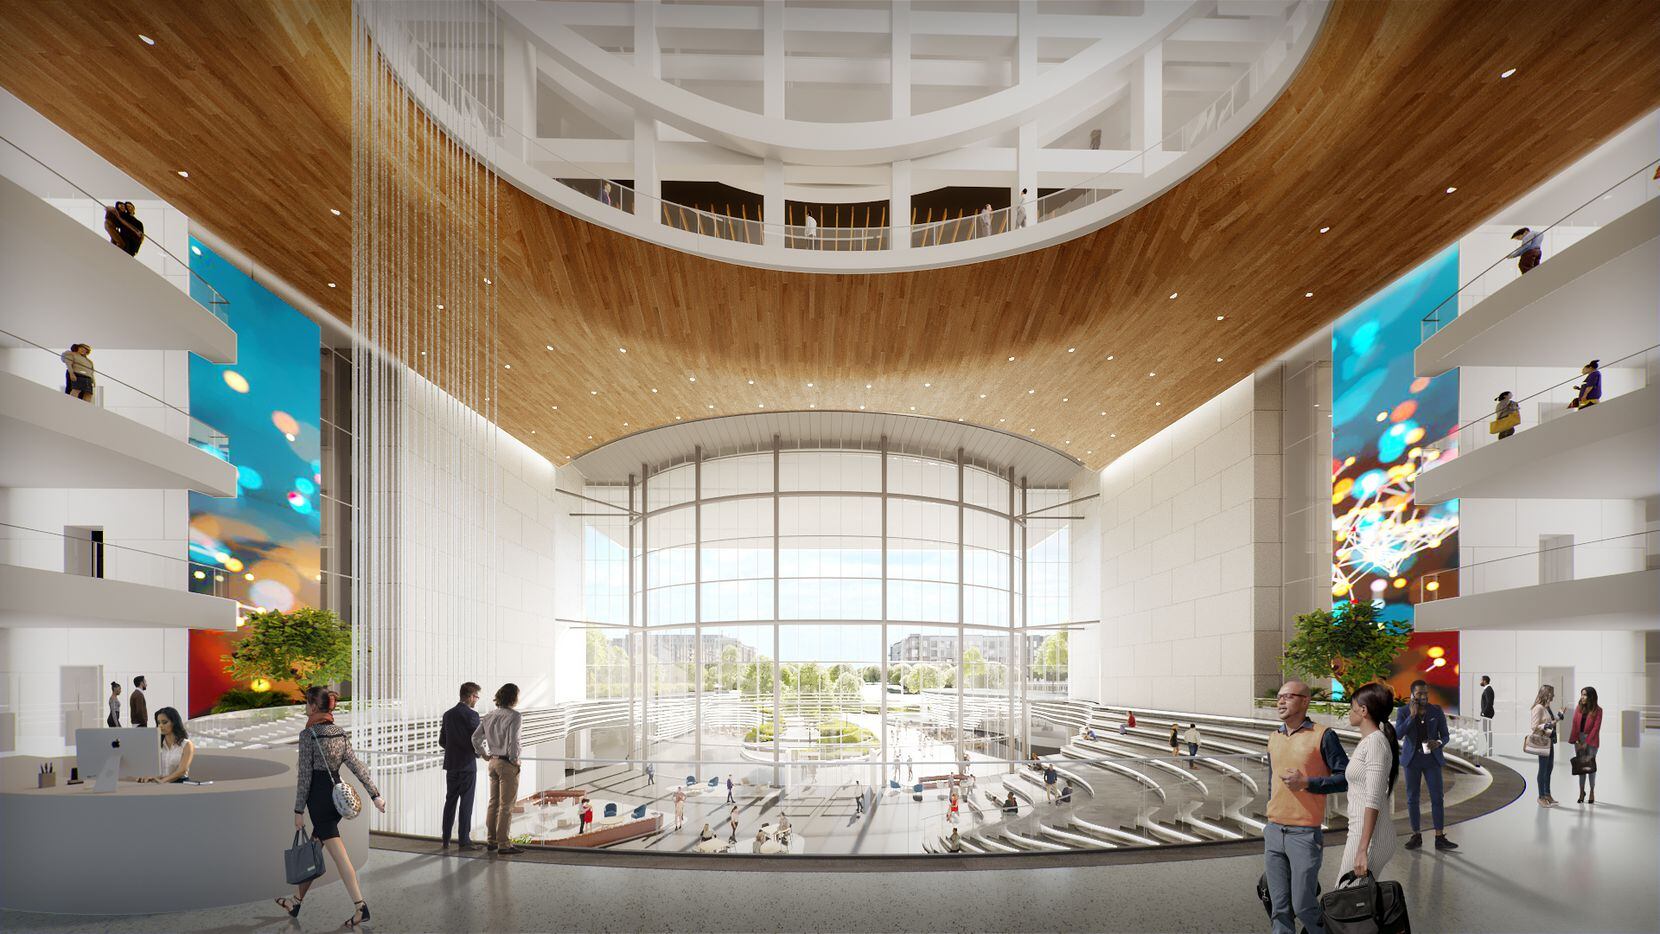 A rendering of what a lobby space would look like.